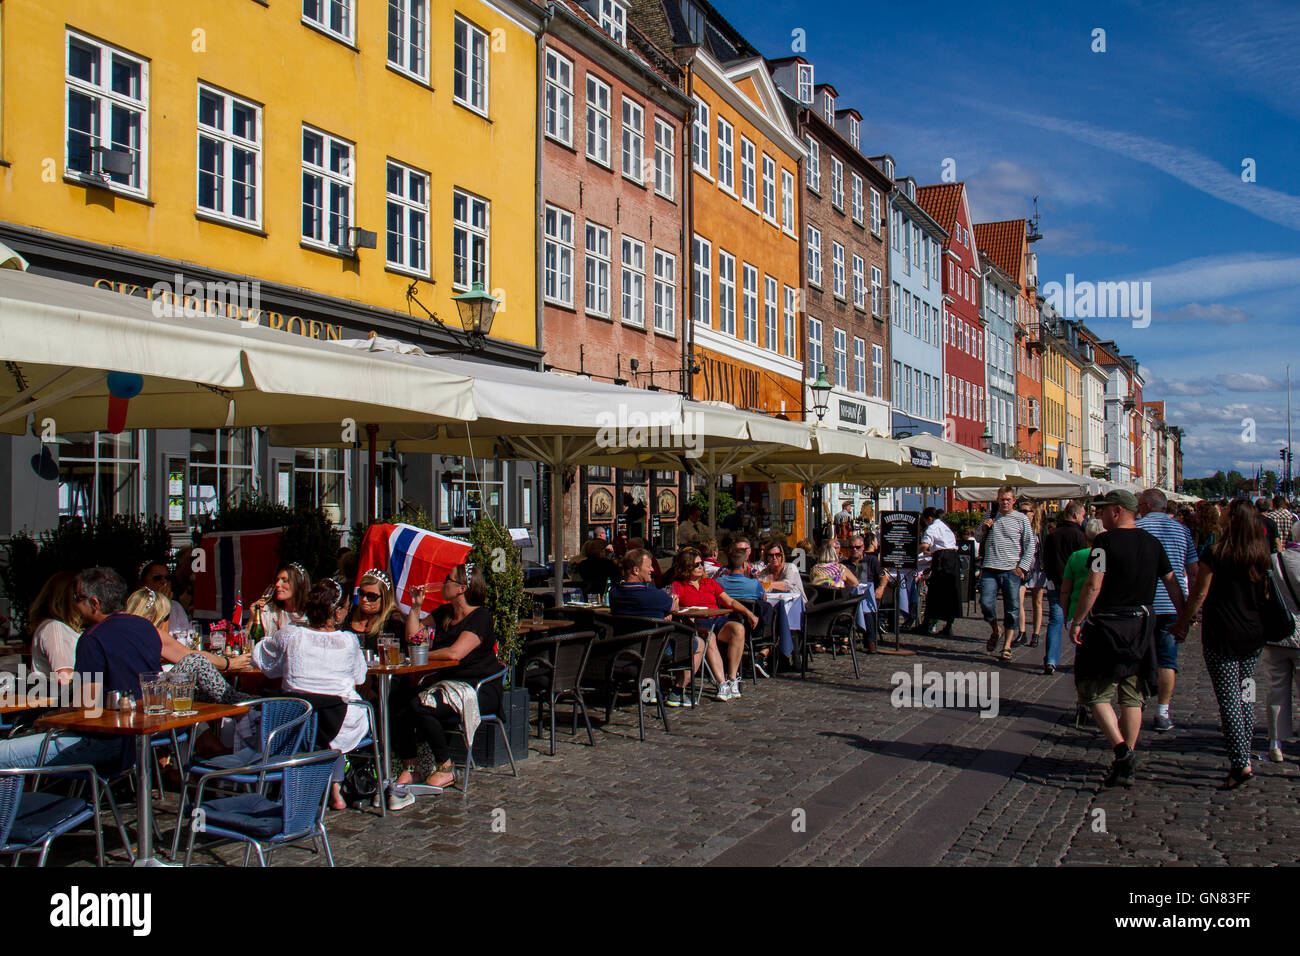 Nyhavn, the colourful waterfront, canal and entertainment district in Copenhagen, Denmark Stock Photo